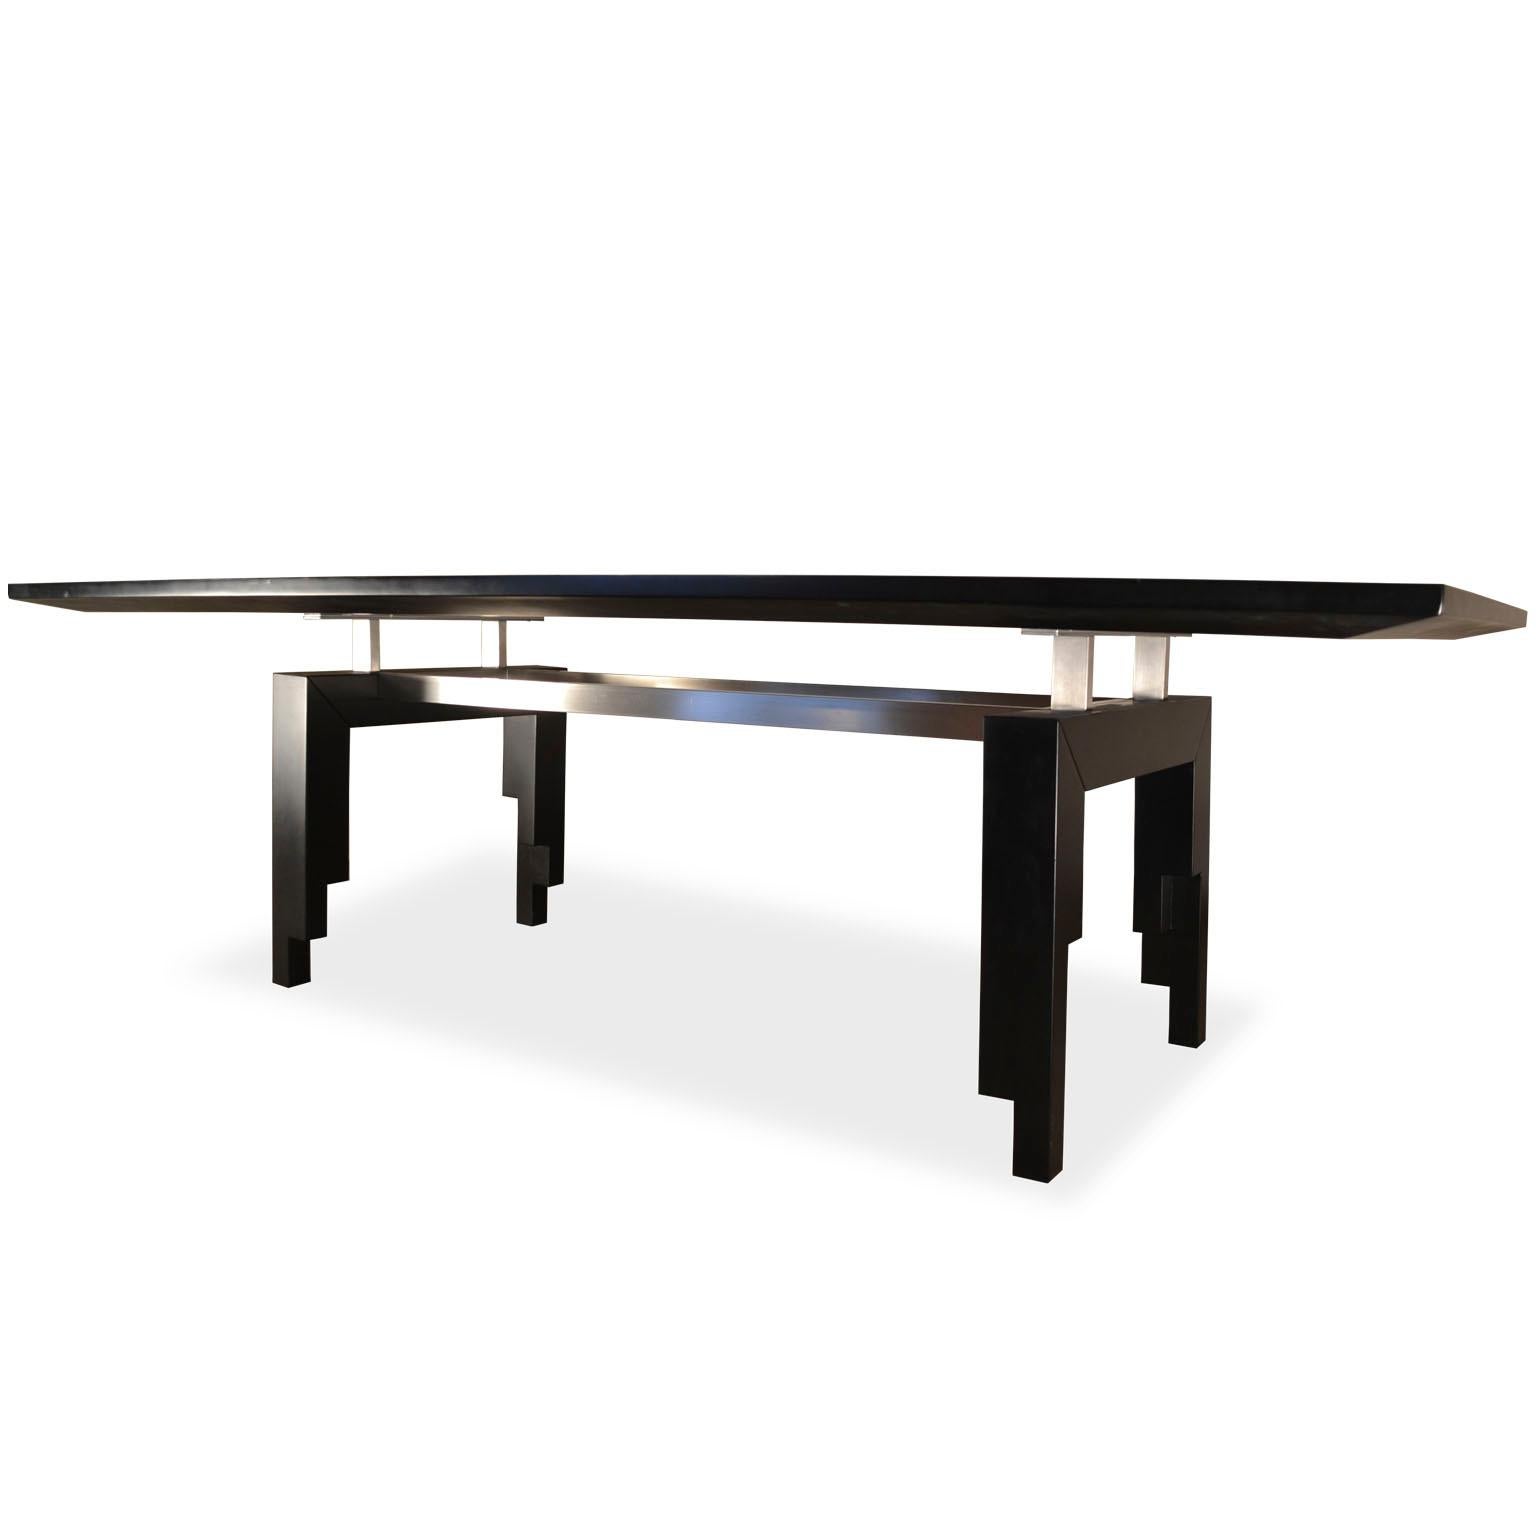 Italian Art Deco Dining Table Scagliola Art Steel Decoration on Lacquered Wooden Base